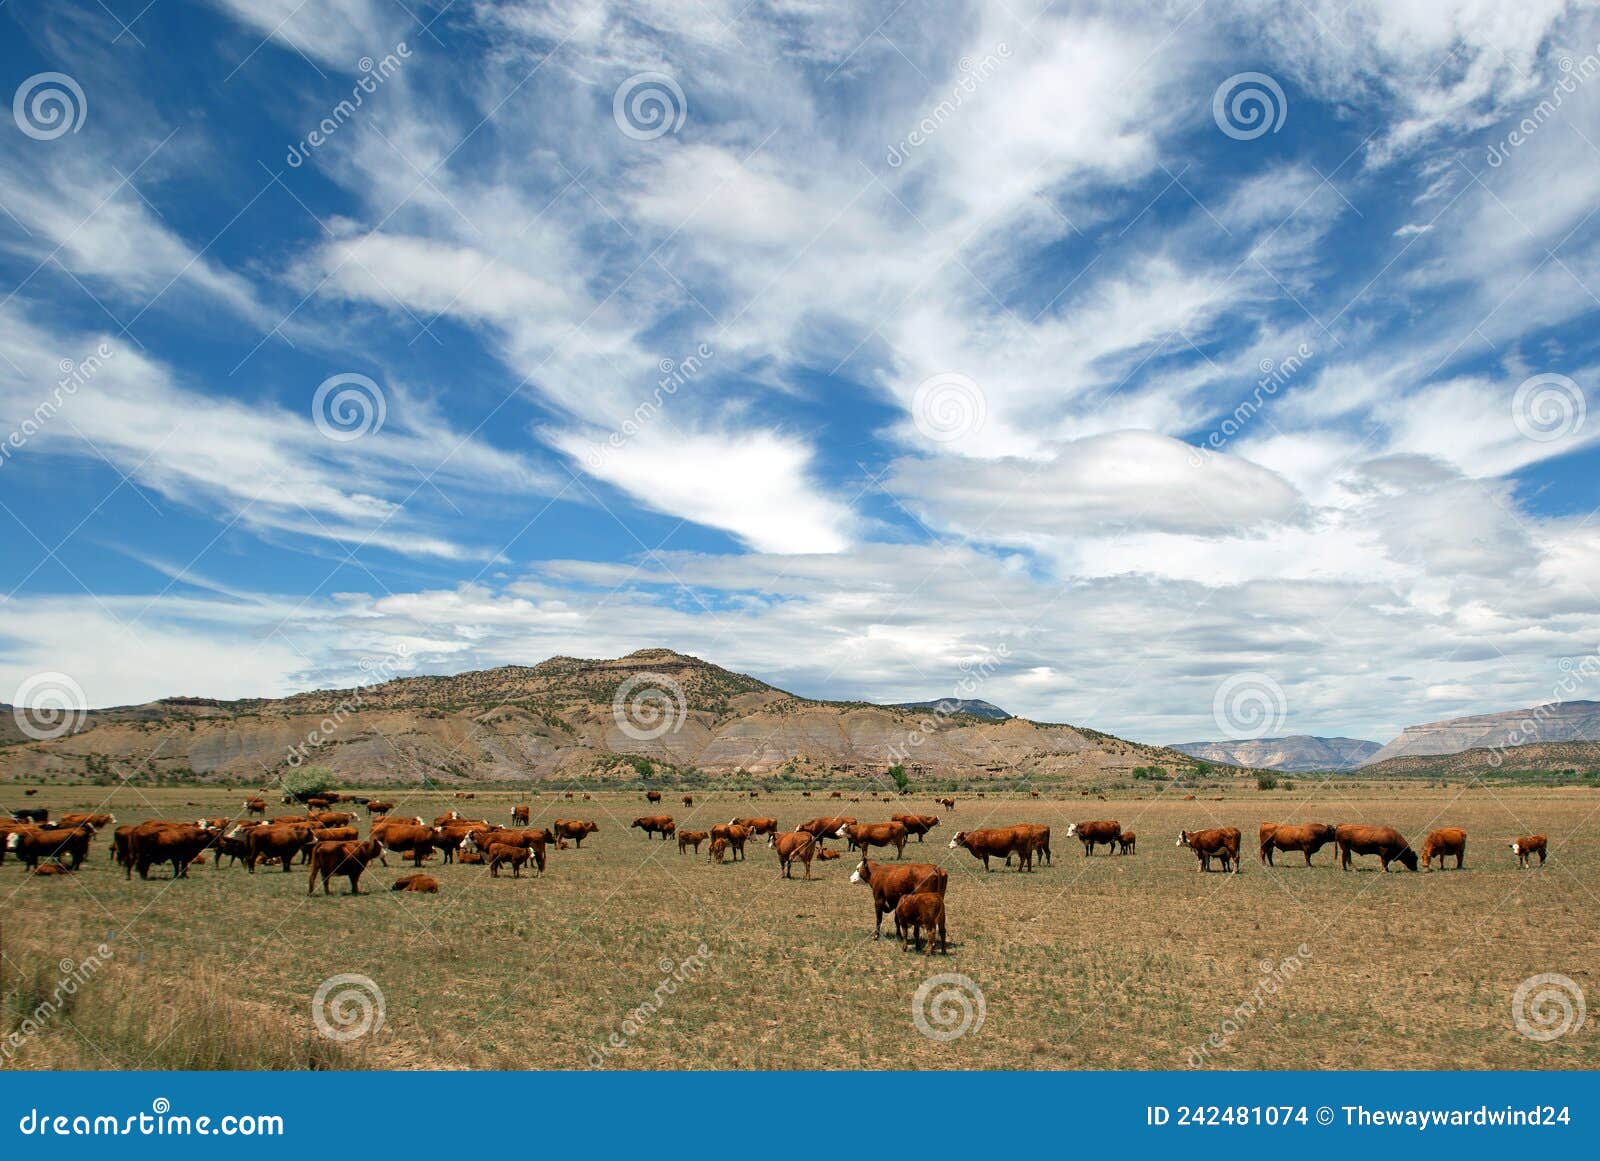 cows in a field before a mountain range